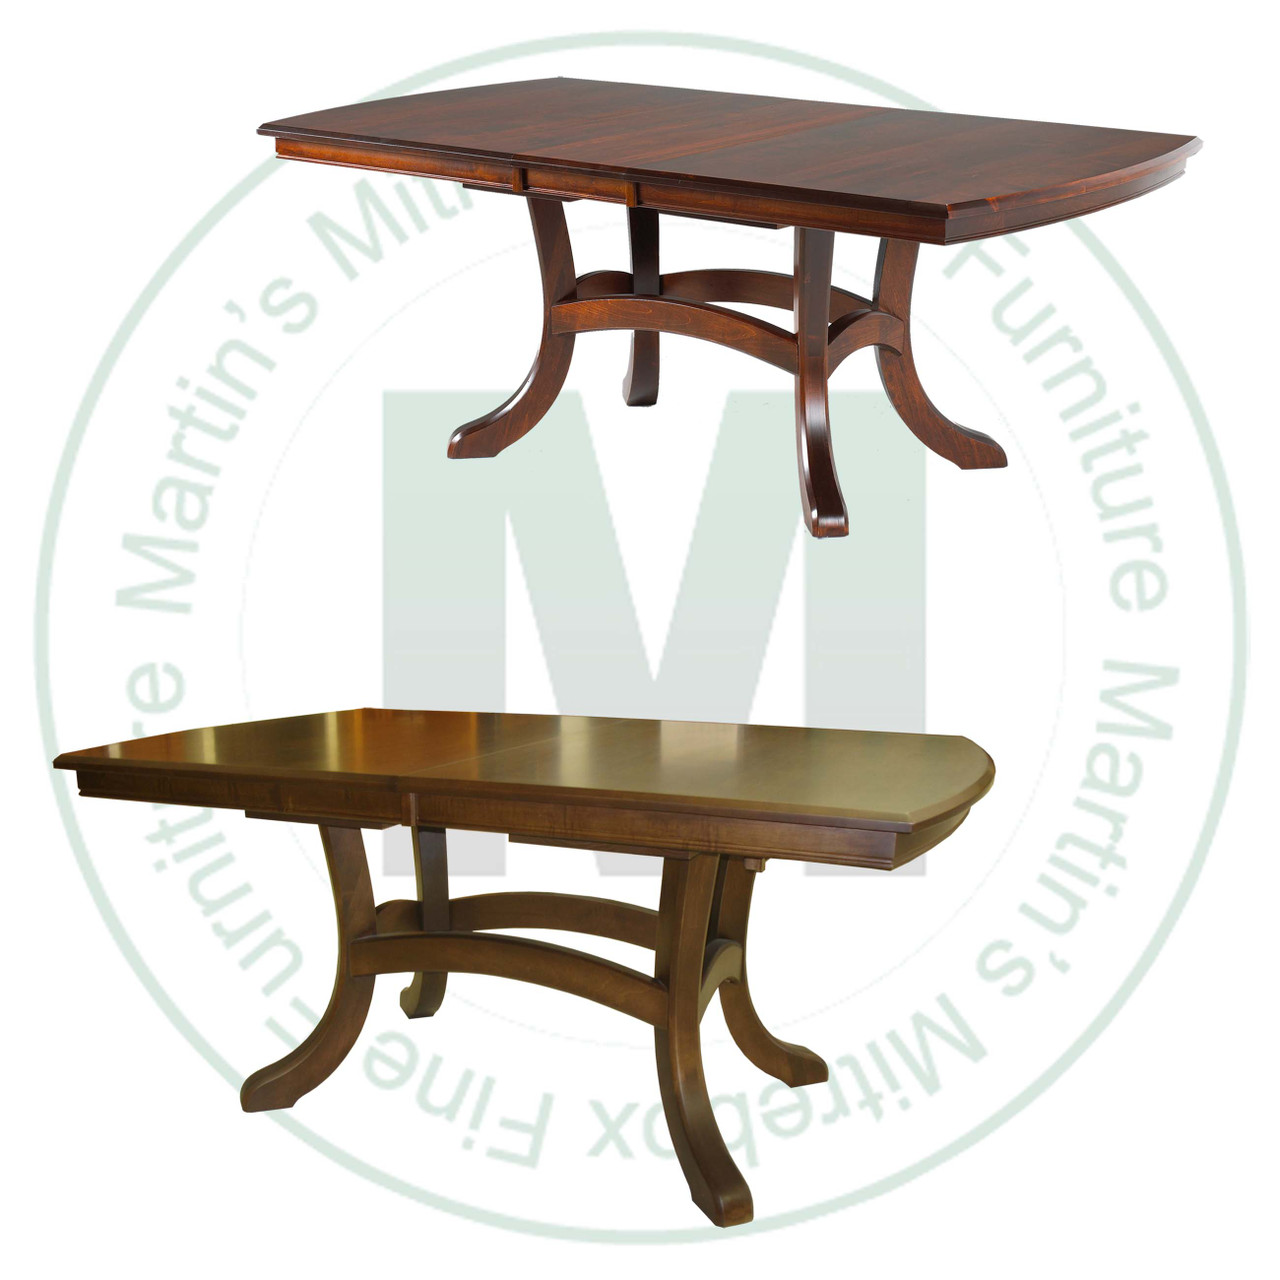 Maple Jordan Double Pedestal Table 54''D x 96''W x 30''H With 2 - 12'' Leaves. Table Has 1.25'' Thick Top